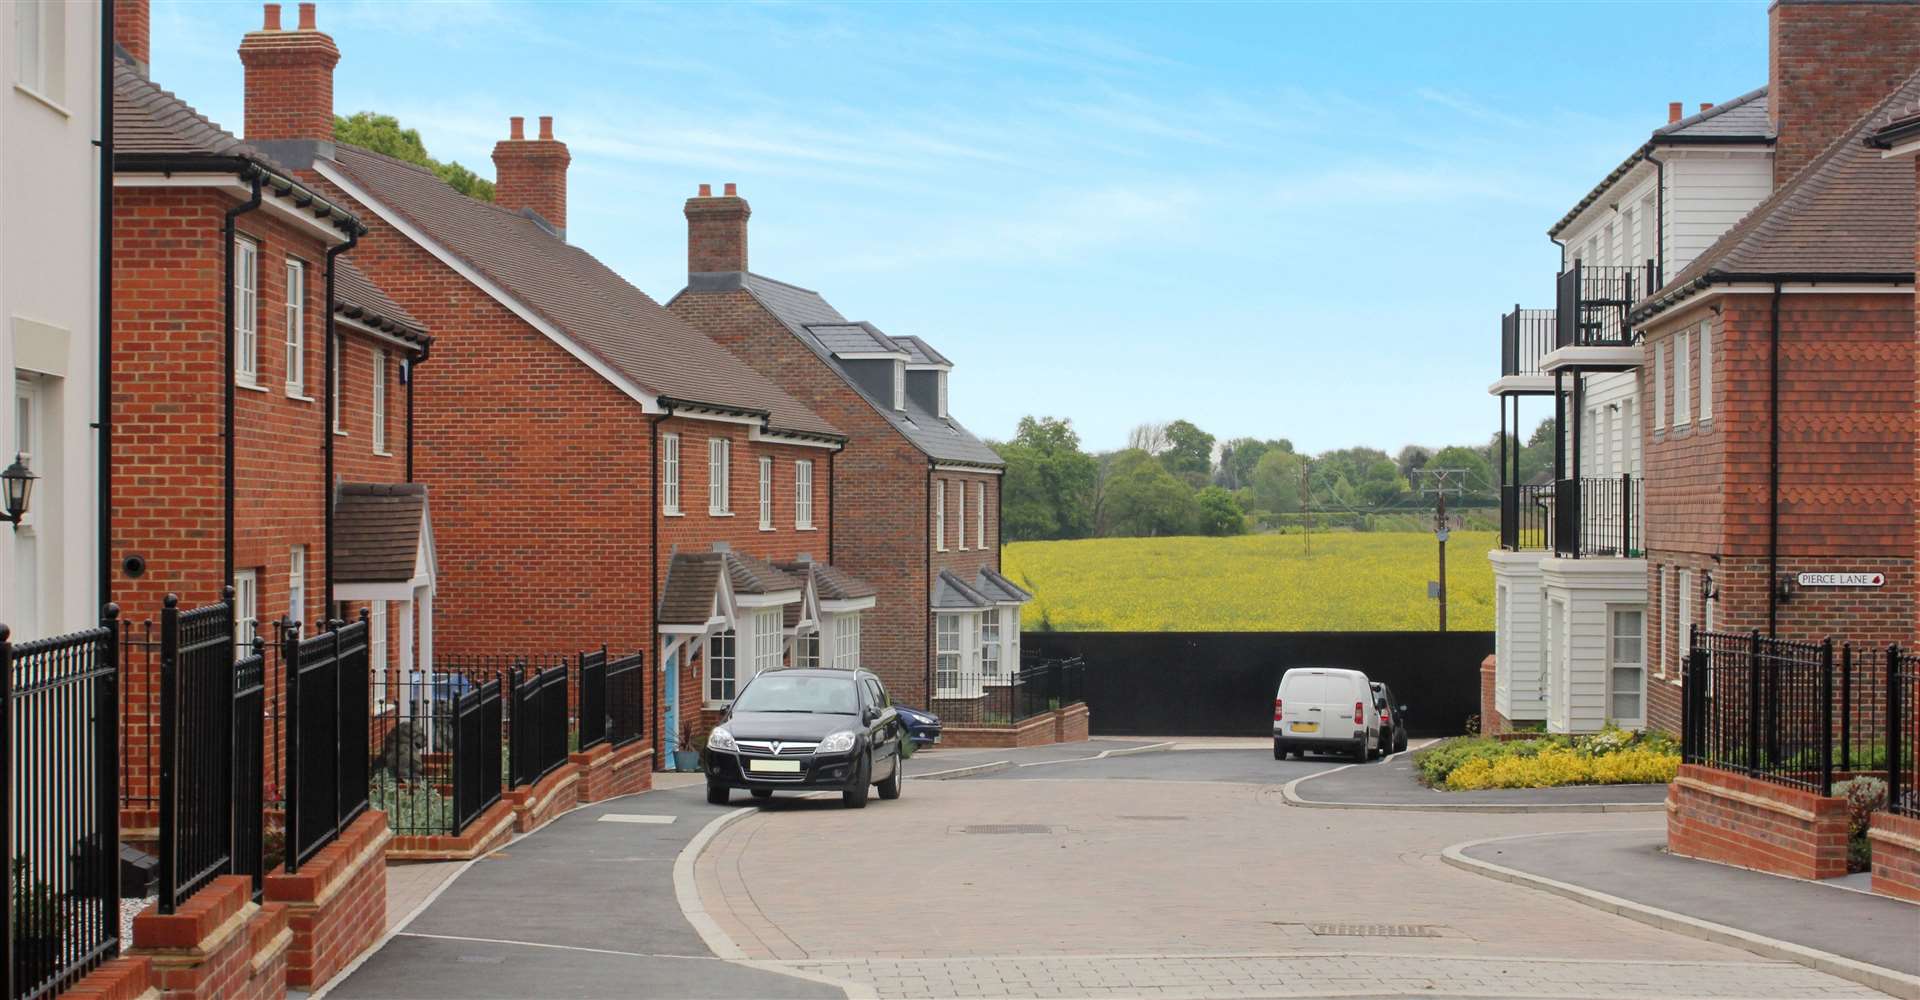 Although these homes are located in the rural countryside, Tenterden offers quick easy connections.